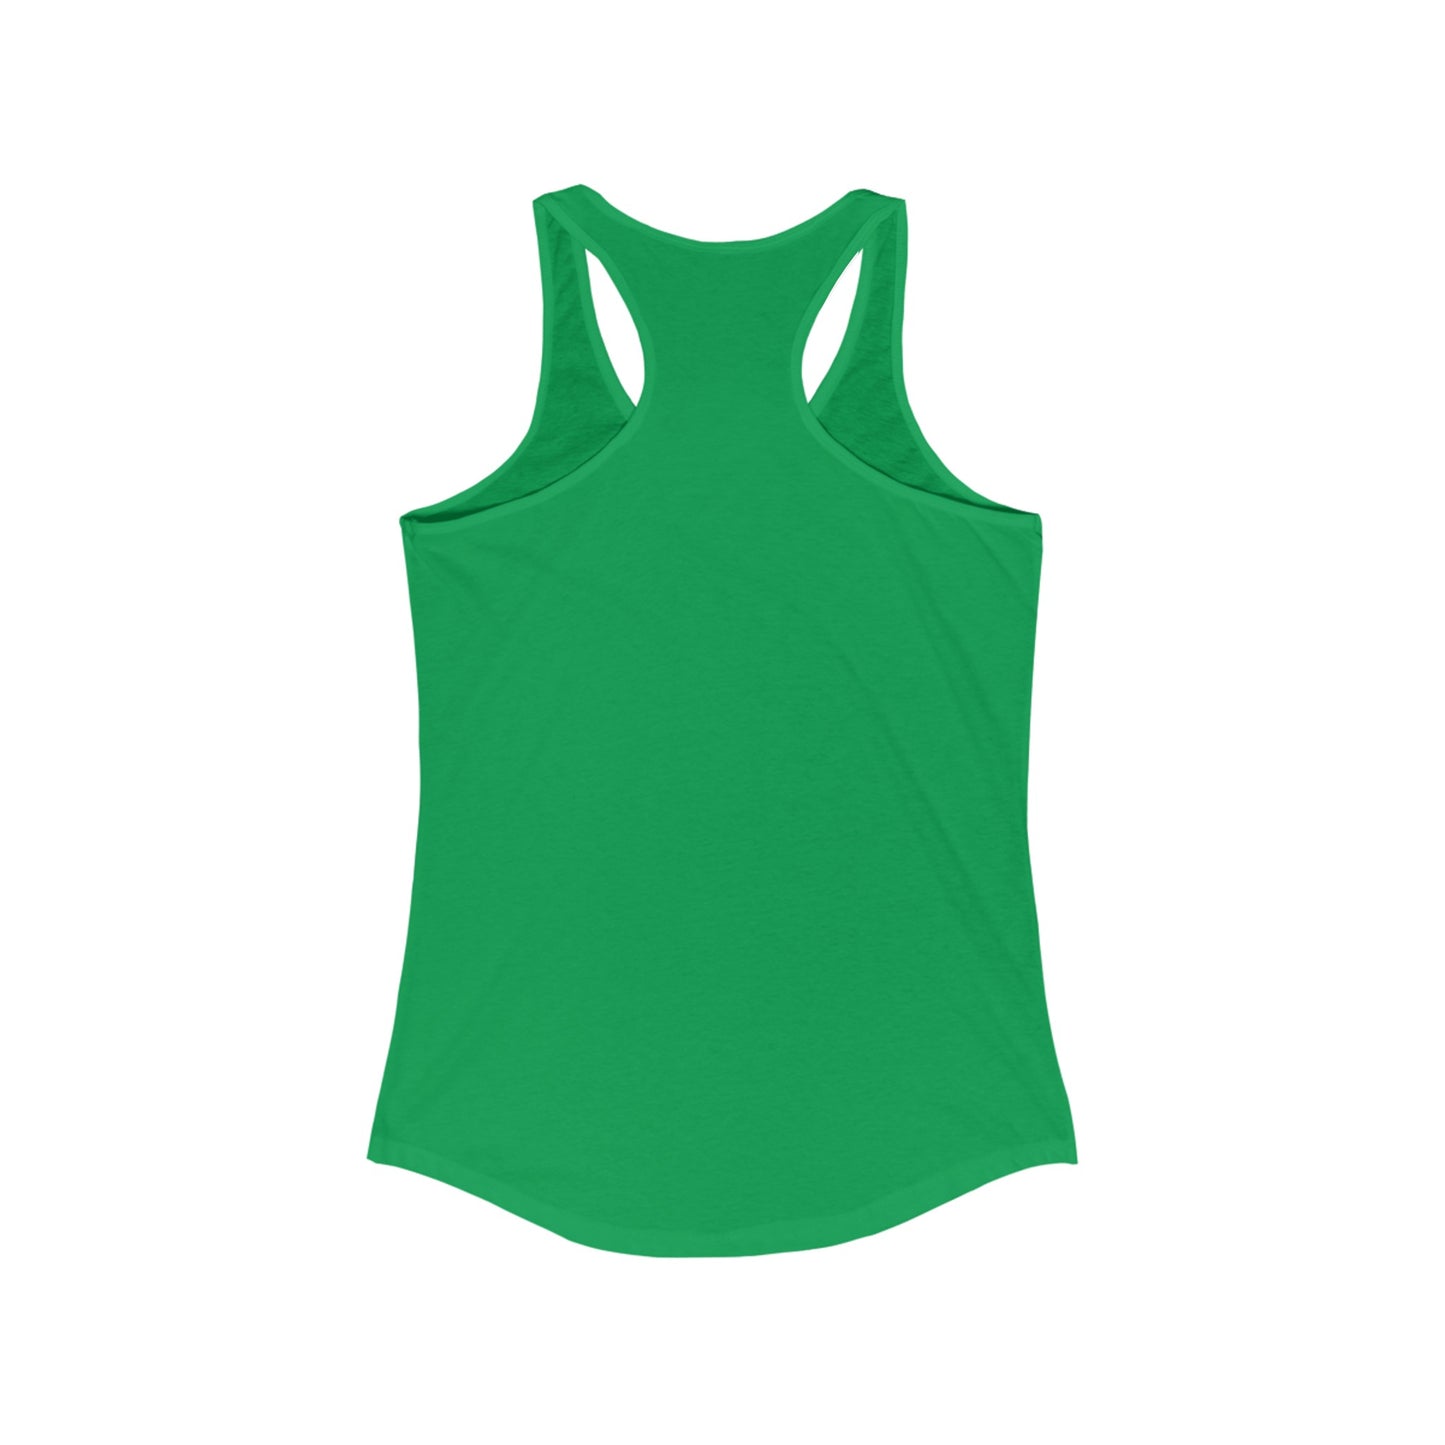 Life is Better at The Lake - Women's Ideal Racerback Tank